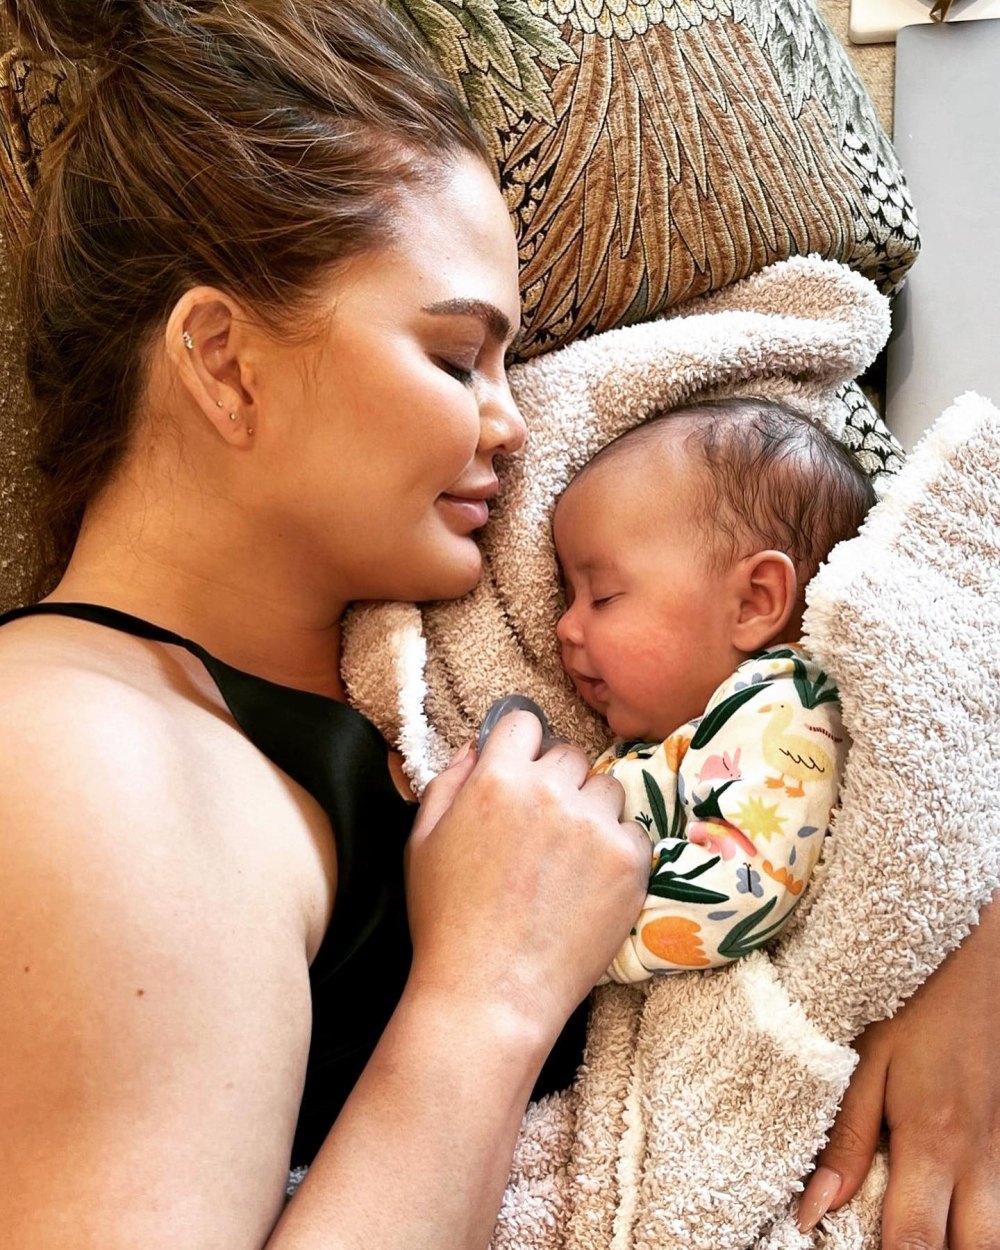 Chrissy Teigen got real about post-baby boobs in nude bath photo